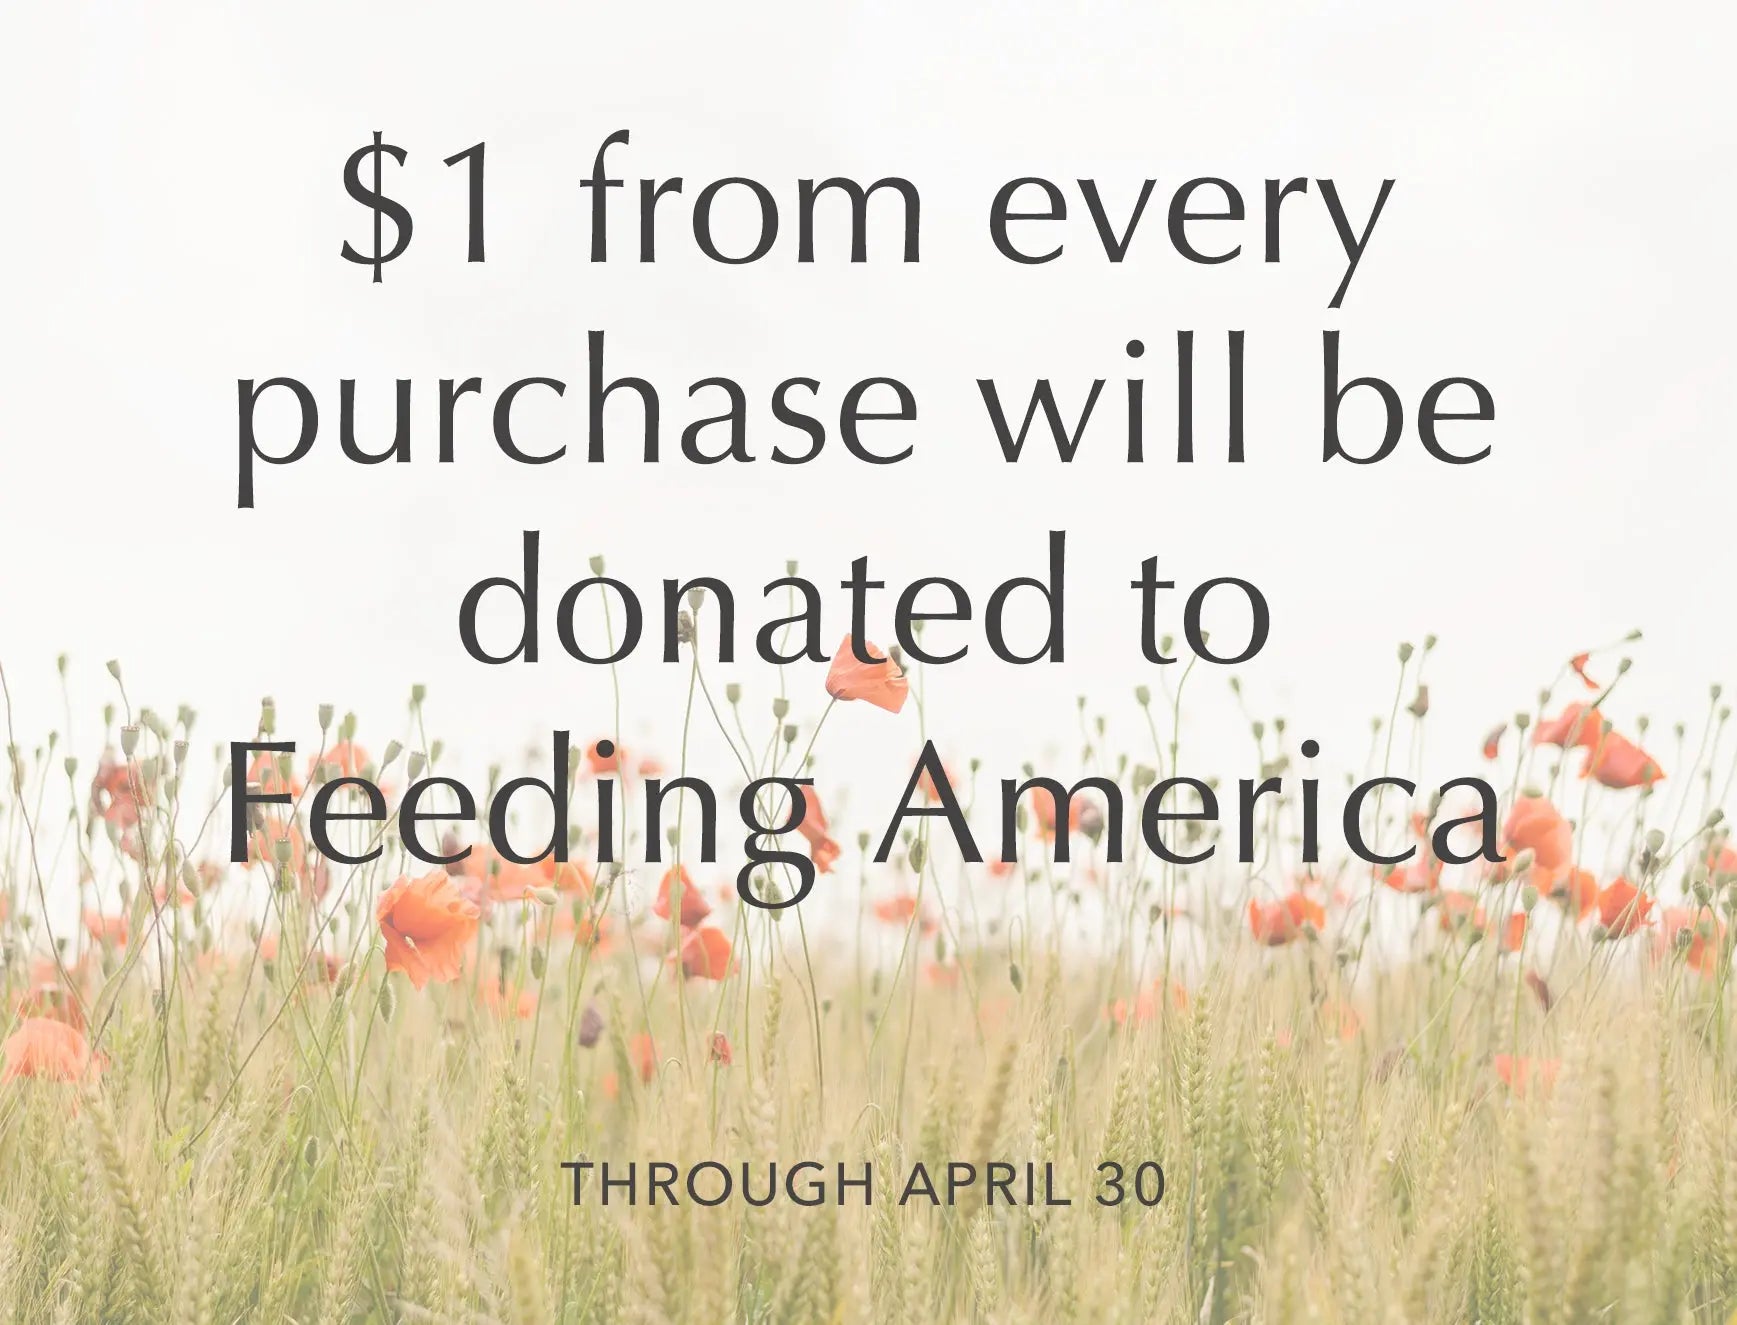 Stay Home & Support Feeding America